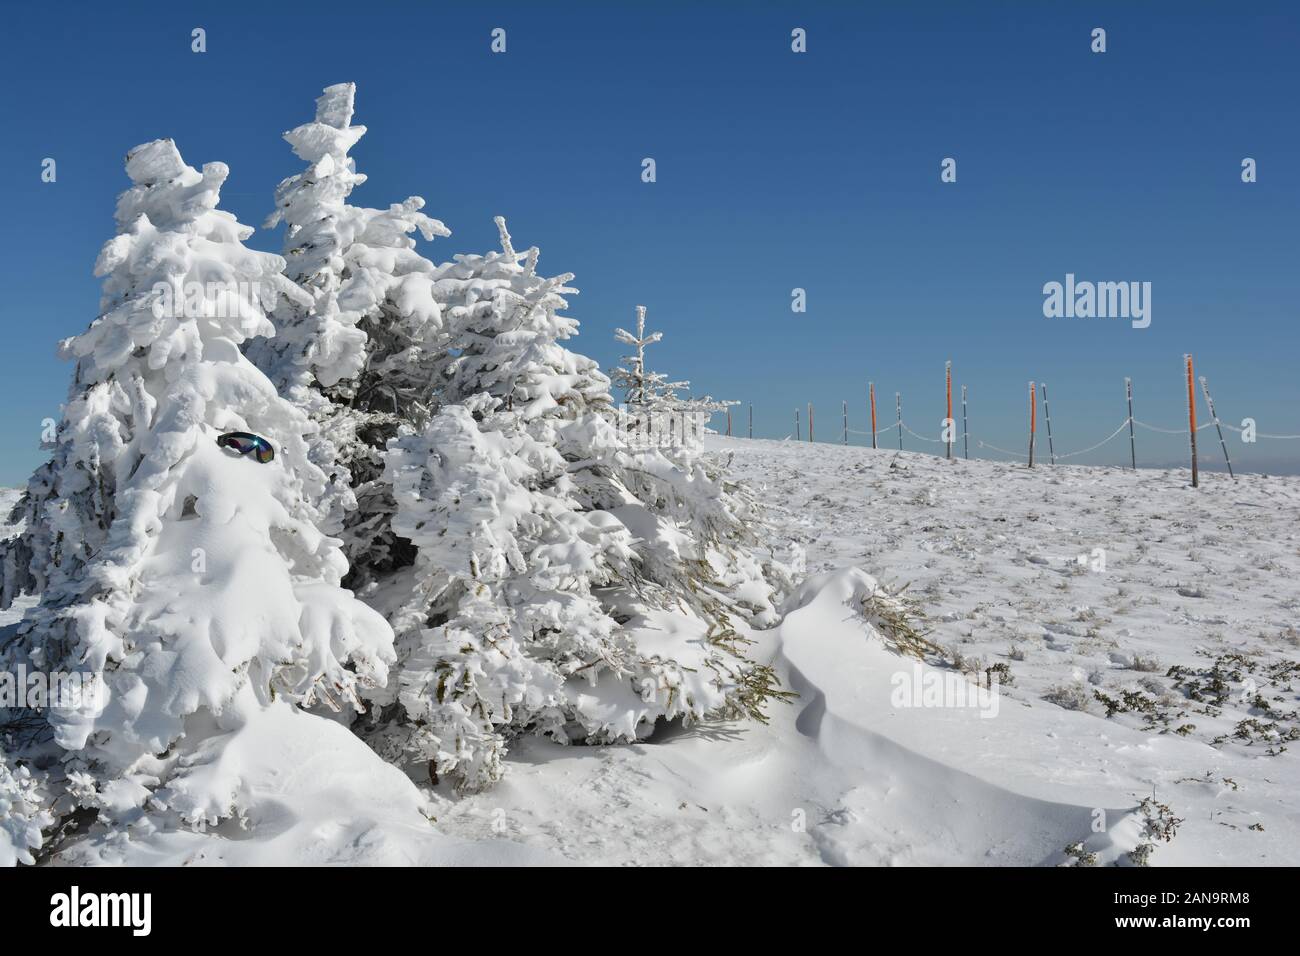 Group of small fir trees covered by snow, forgotten goggles,  snow drifts in foreground and row of pillars with safety rope in background on the top o Stock Photo